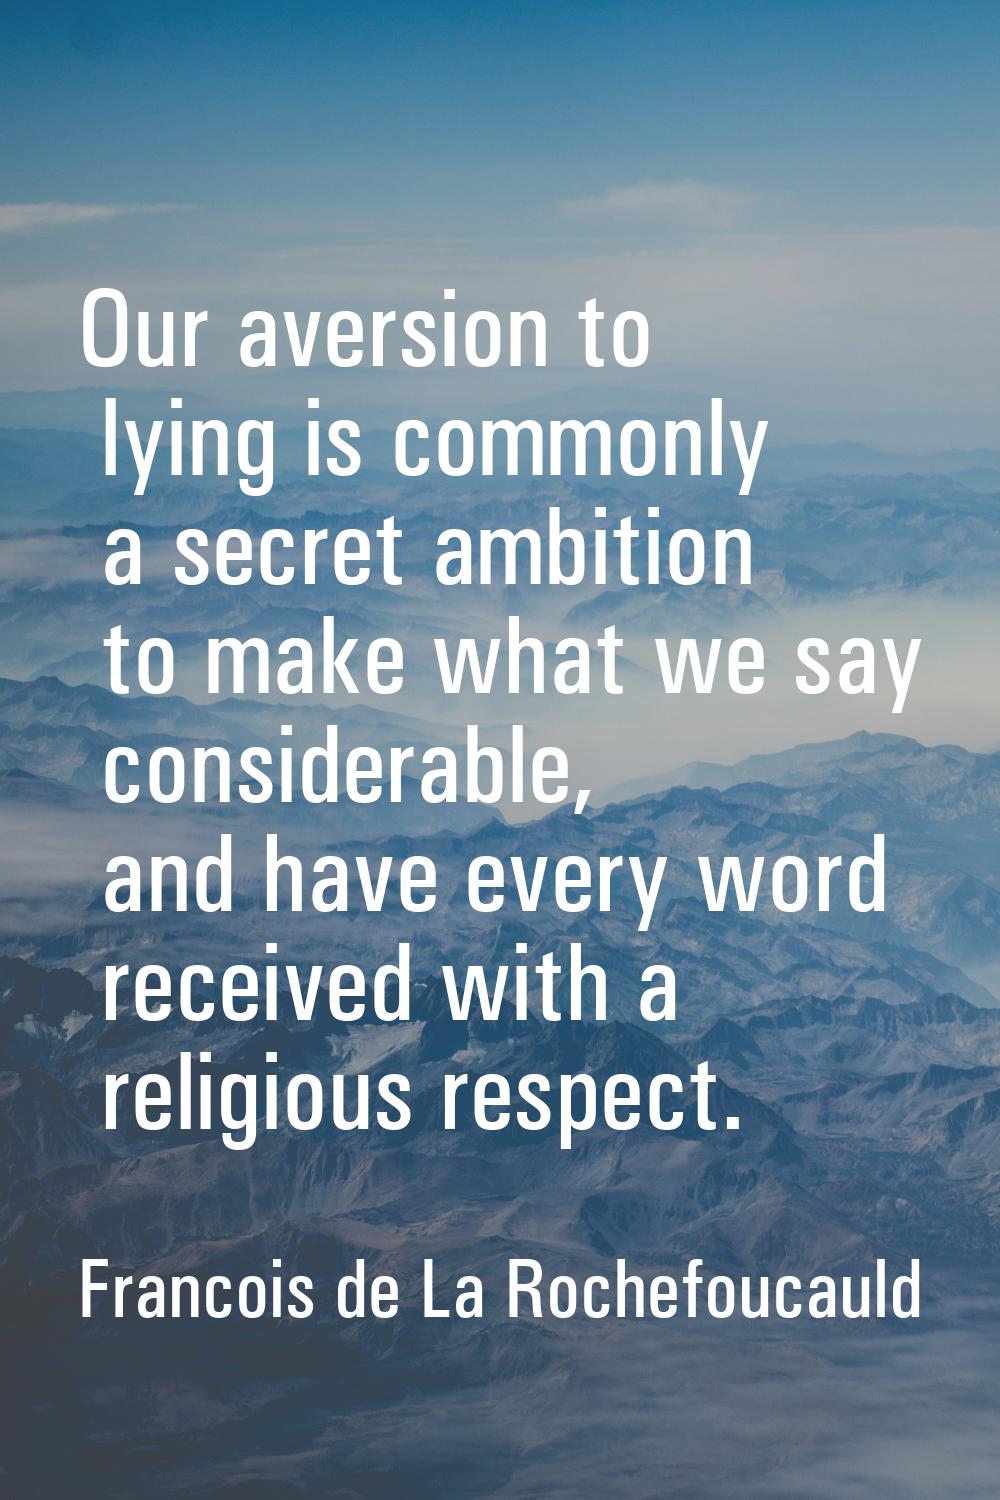 Our aversion to lying is commonly a secret ambition to make what we say considerable, and have ever